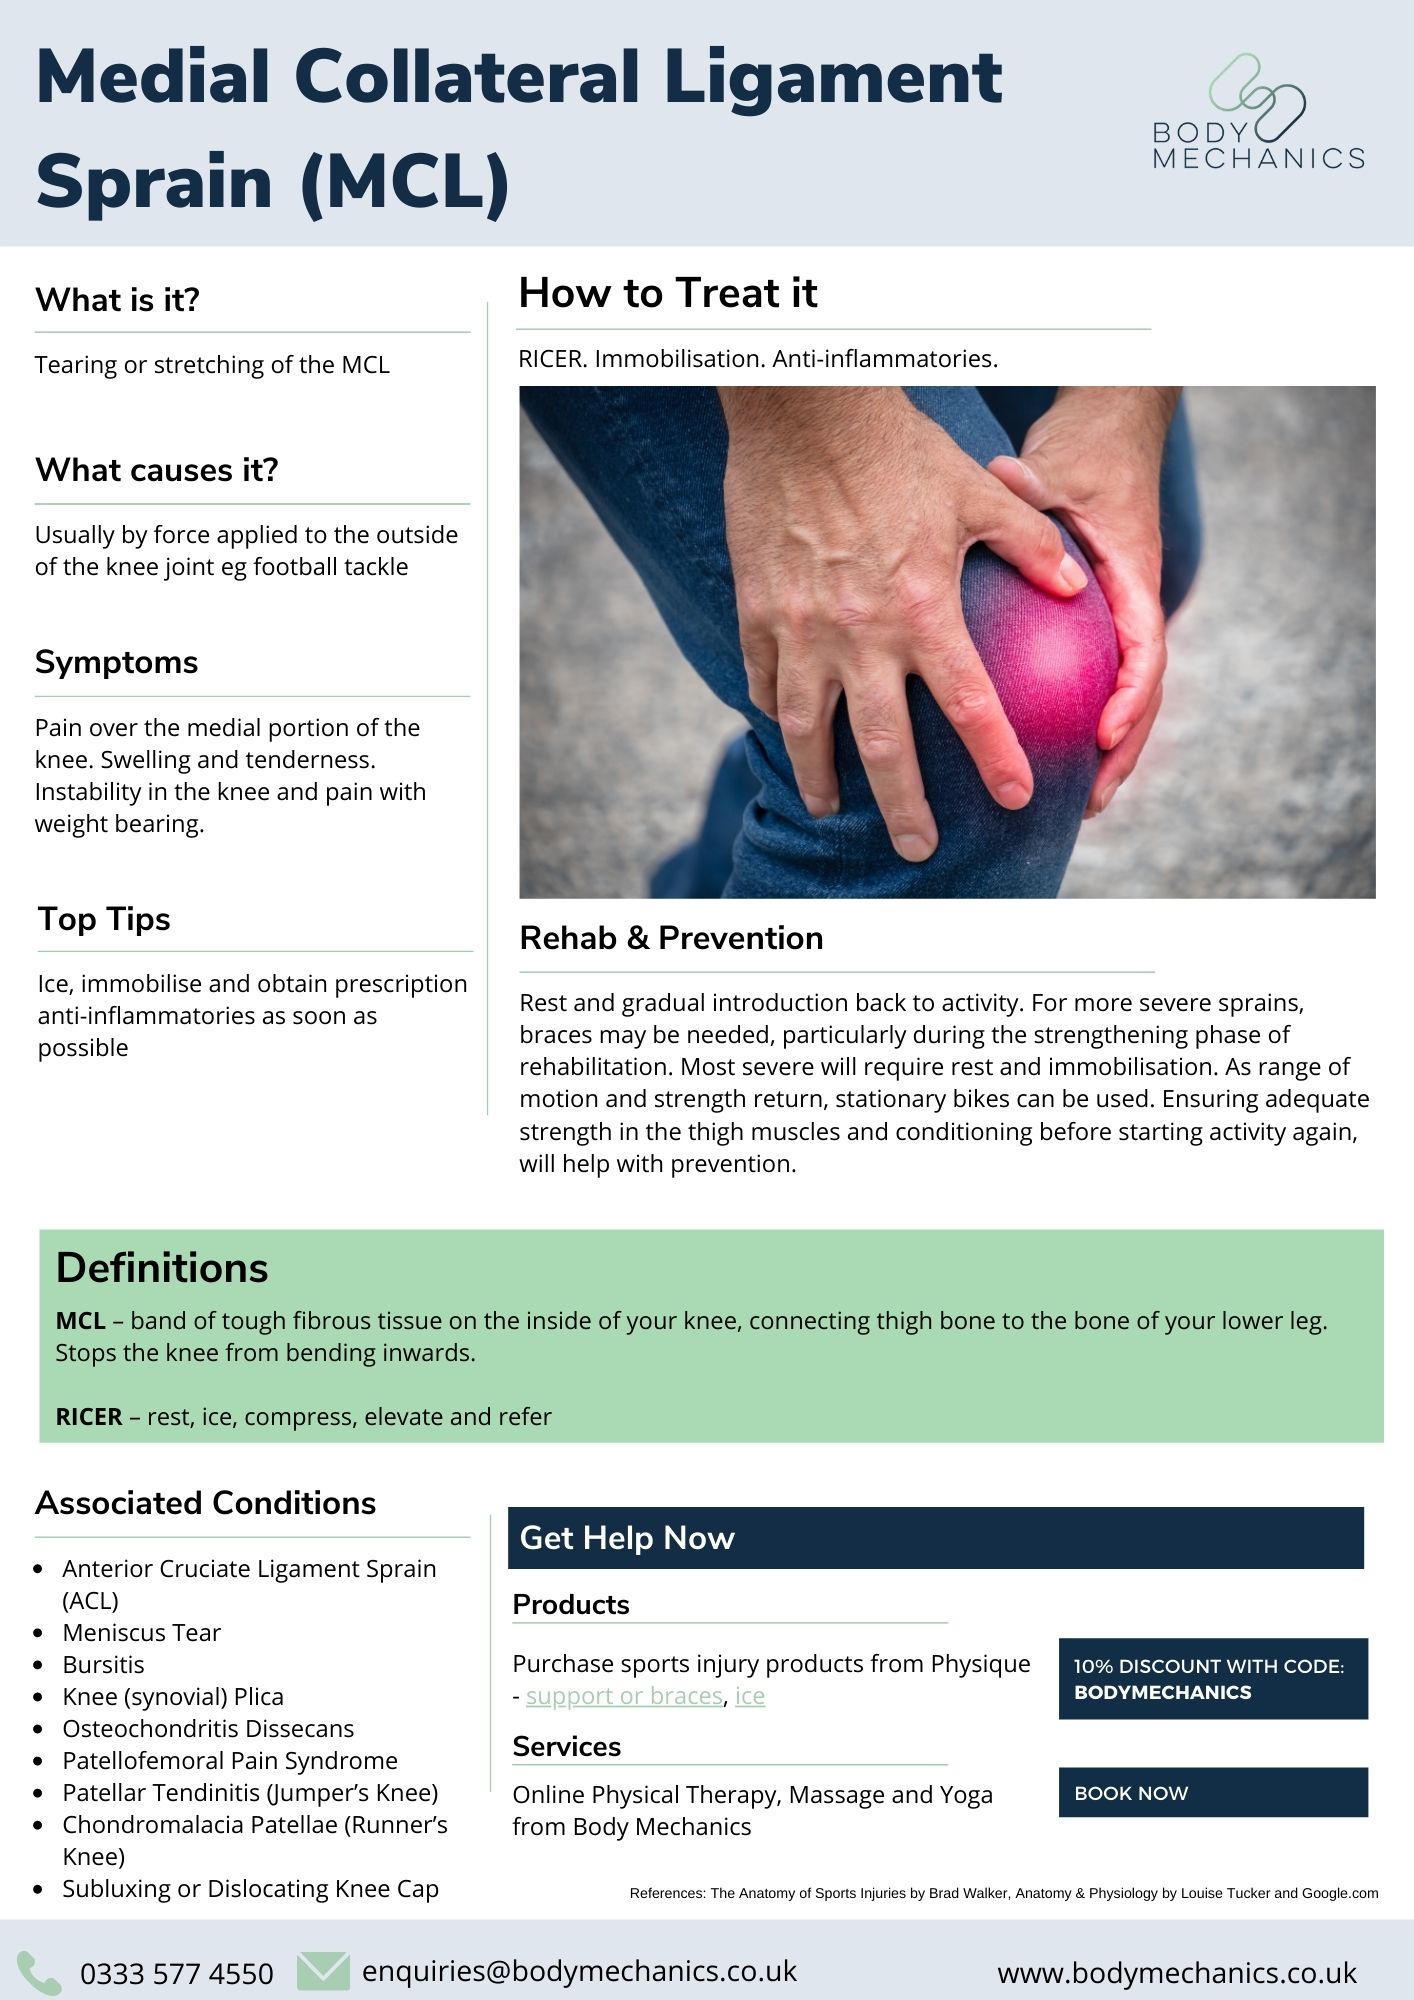 Medial Collateral Ligament Sprain (MCL) Infosheet